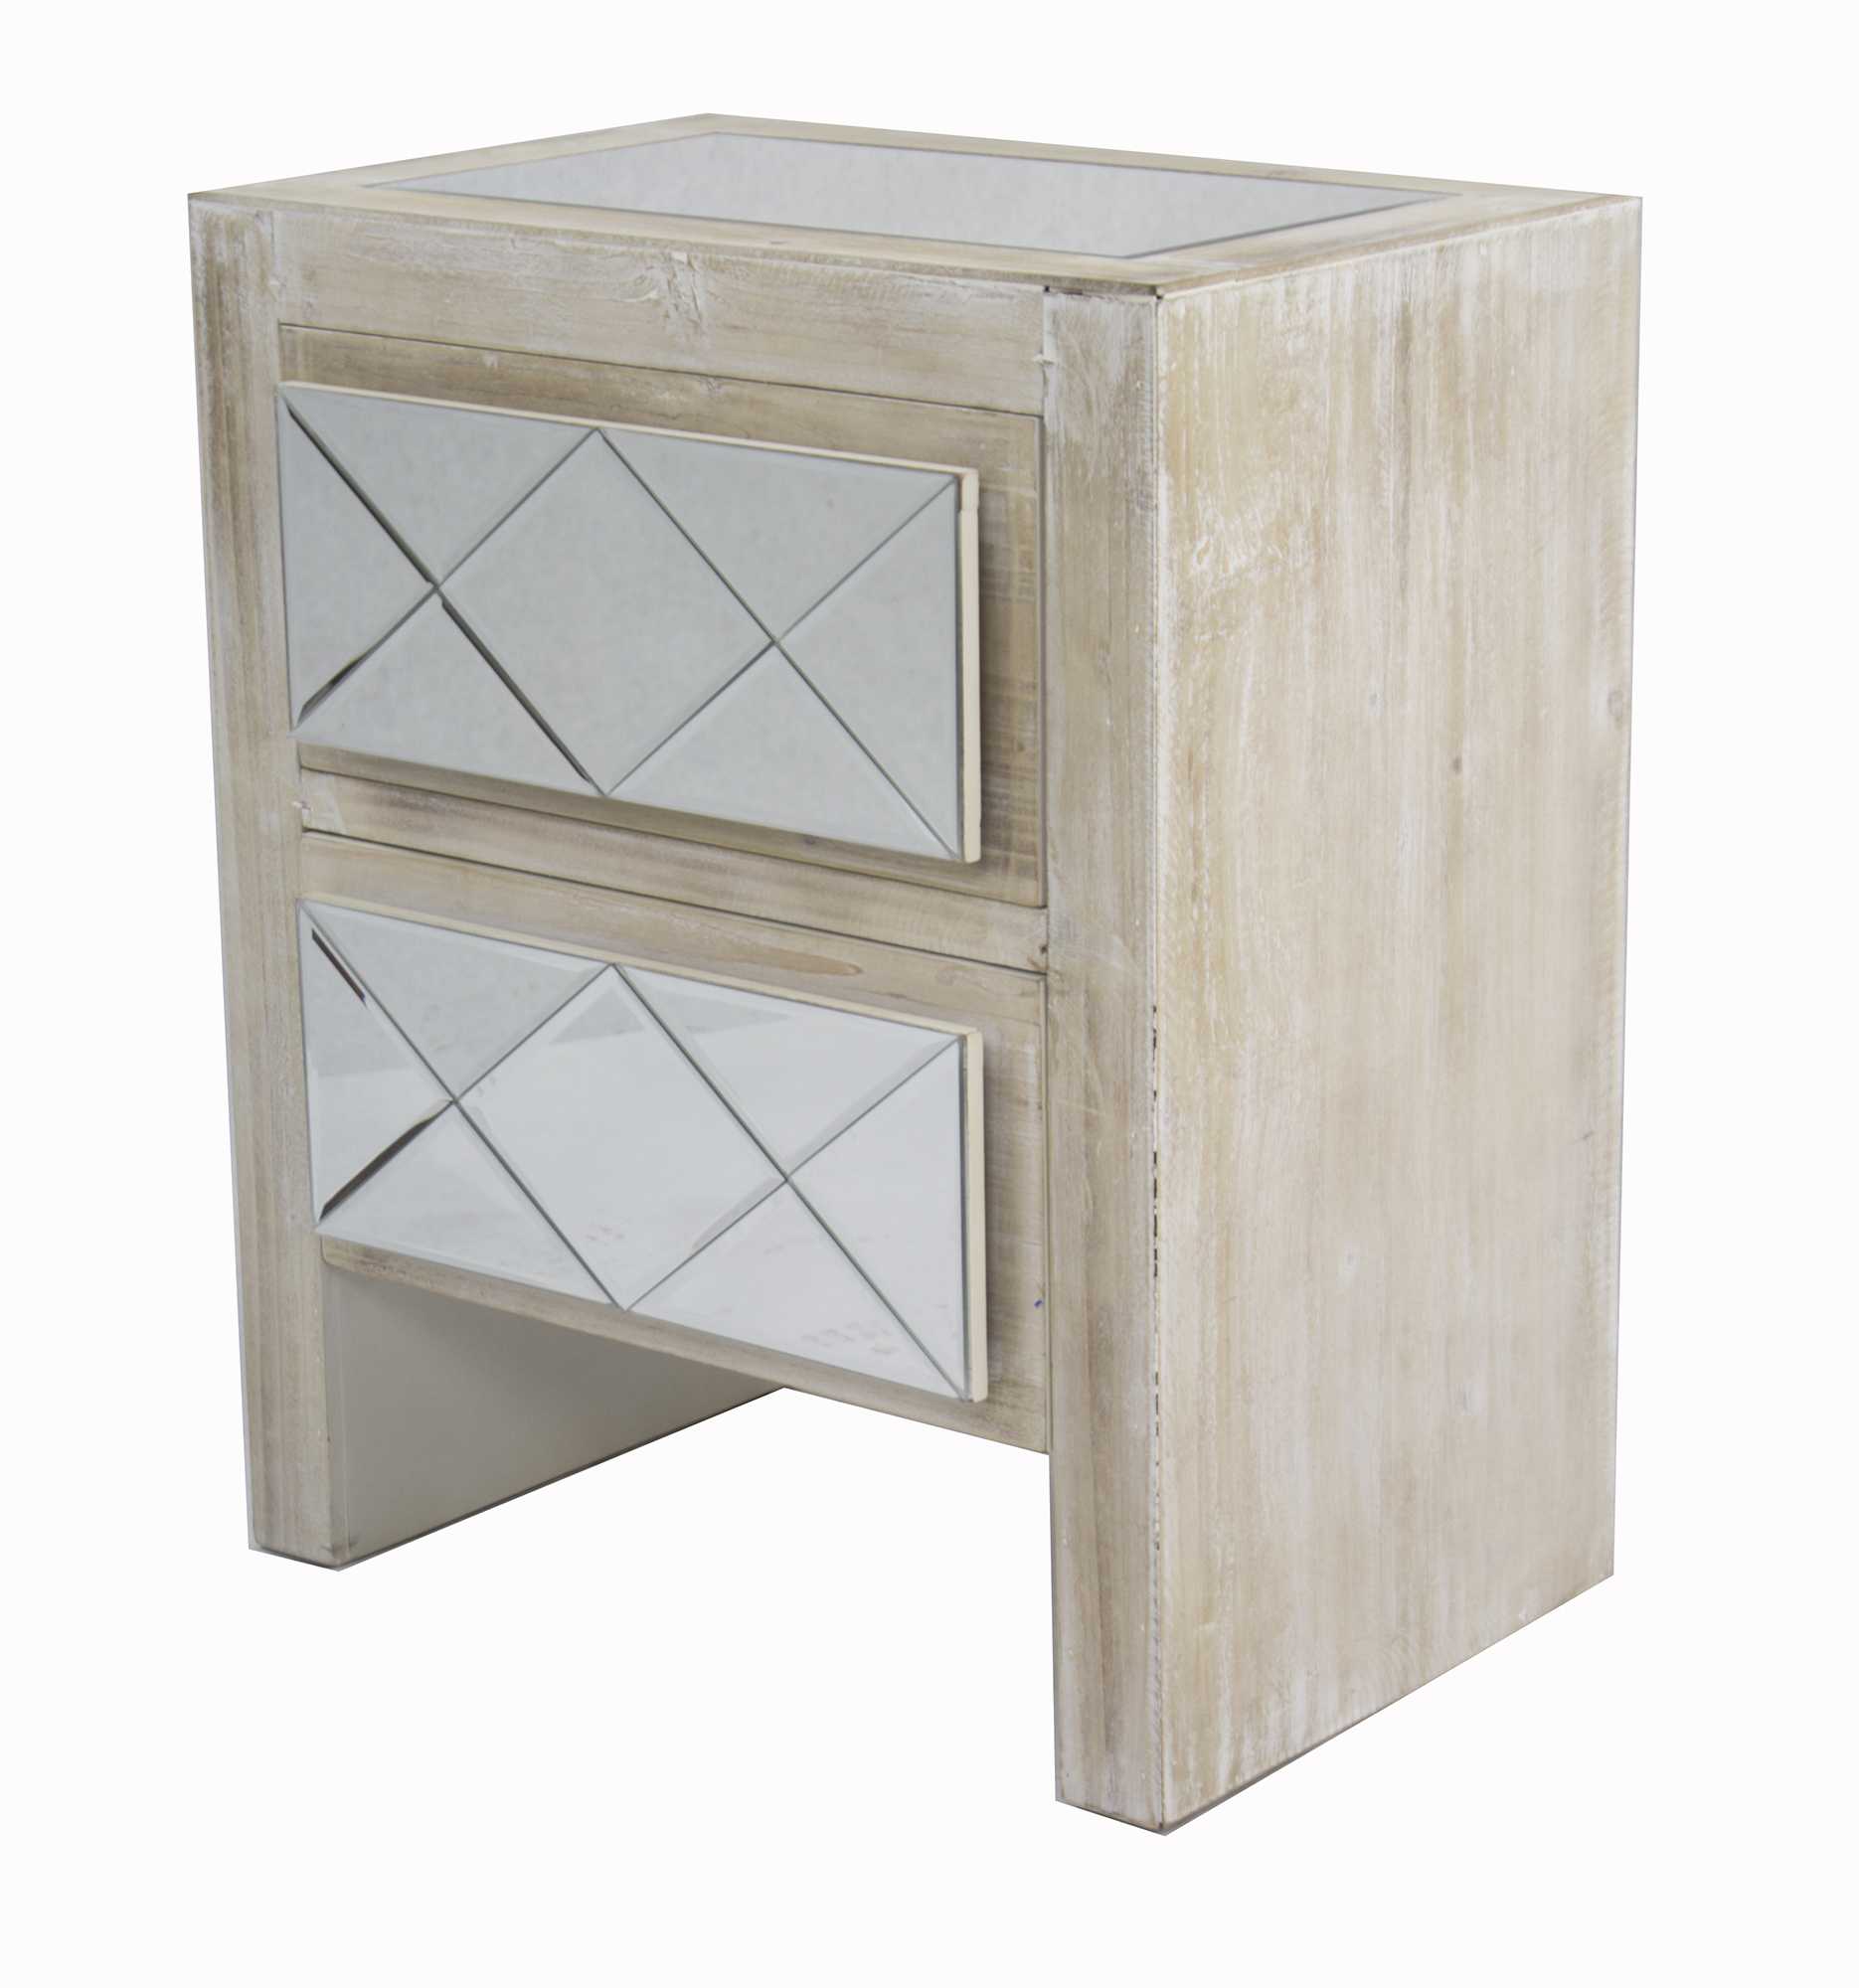 19.6" X 13.8" X 23.6" White Washed MDF Wood Mirrored Glass Cabinet with Drawers and Mirrored Glass